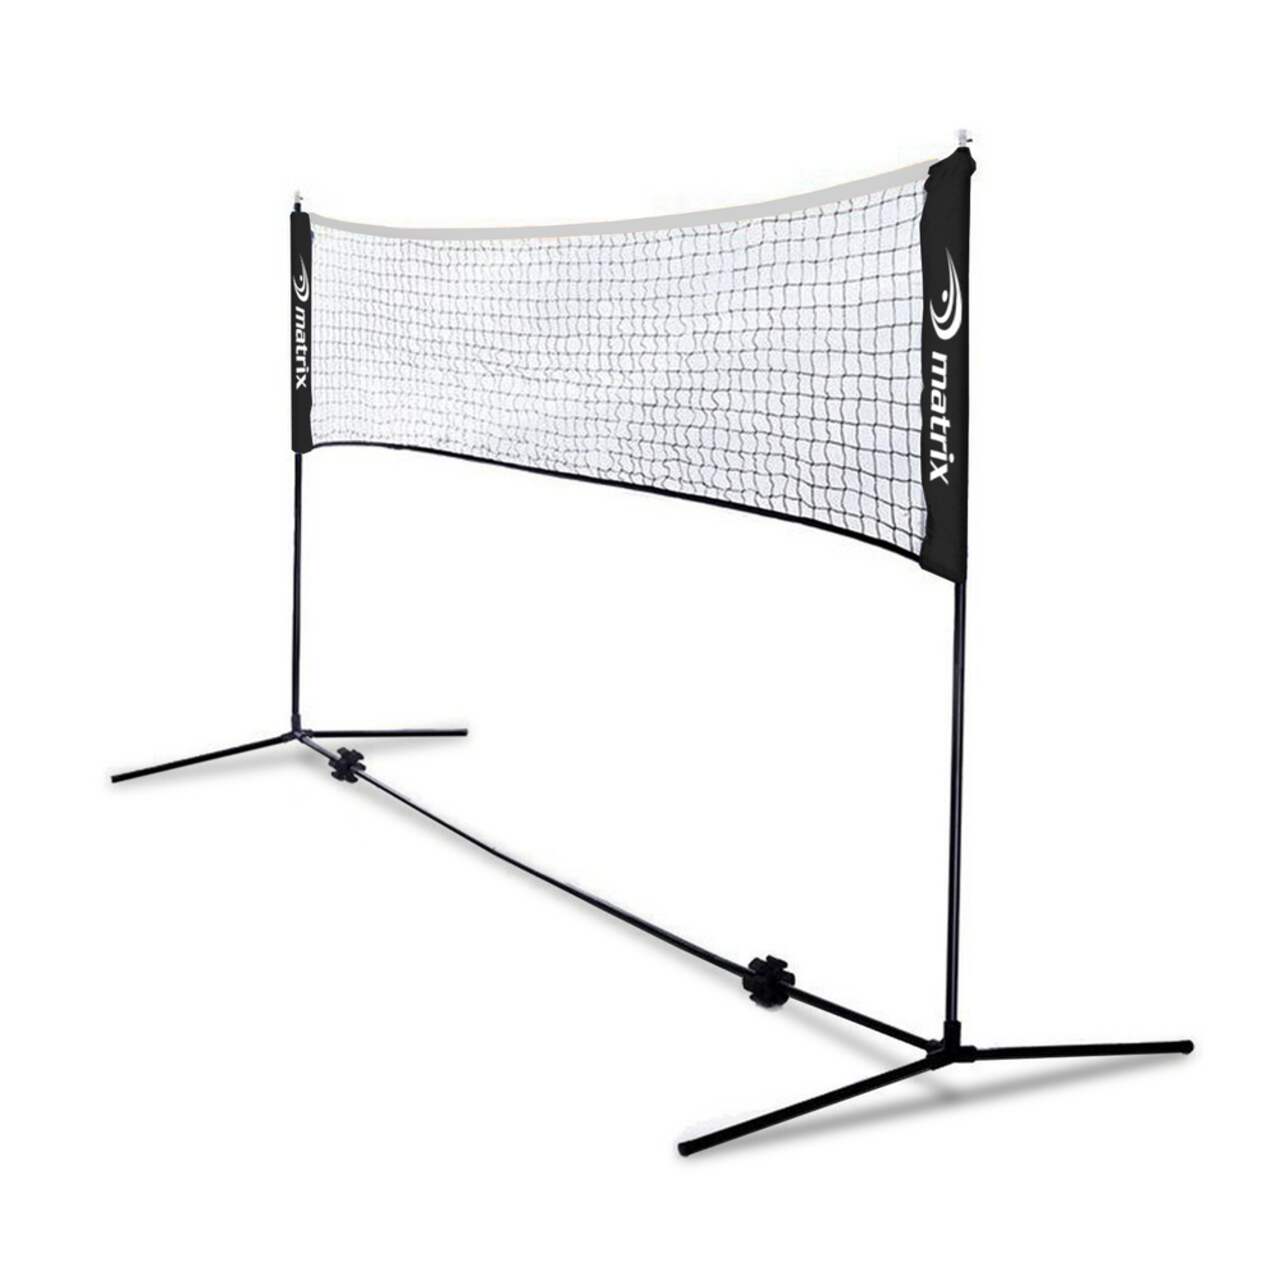 https://media-www.canadiantire.ca/product/playing/team-sports-and-golf/sports-equipment-accessories/1841101/matrix-10-adjustable-combo-net-12bb6a1f-2af2-4092-bb3d-089e30c82608.png?imdensity=1&imwidth=640&impolicy=mZoom